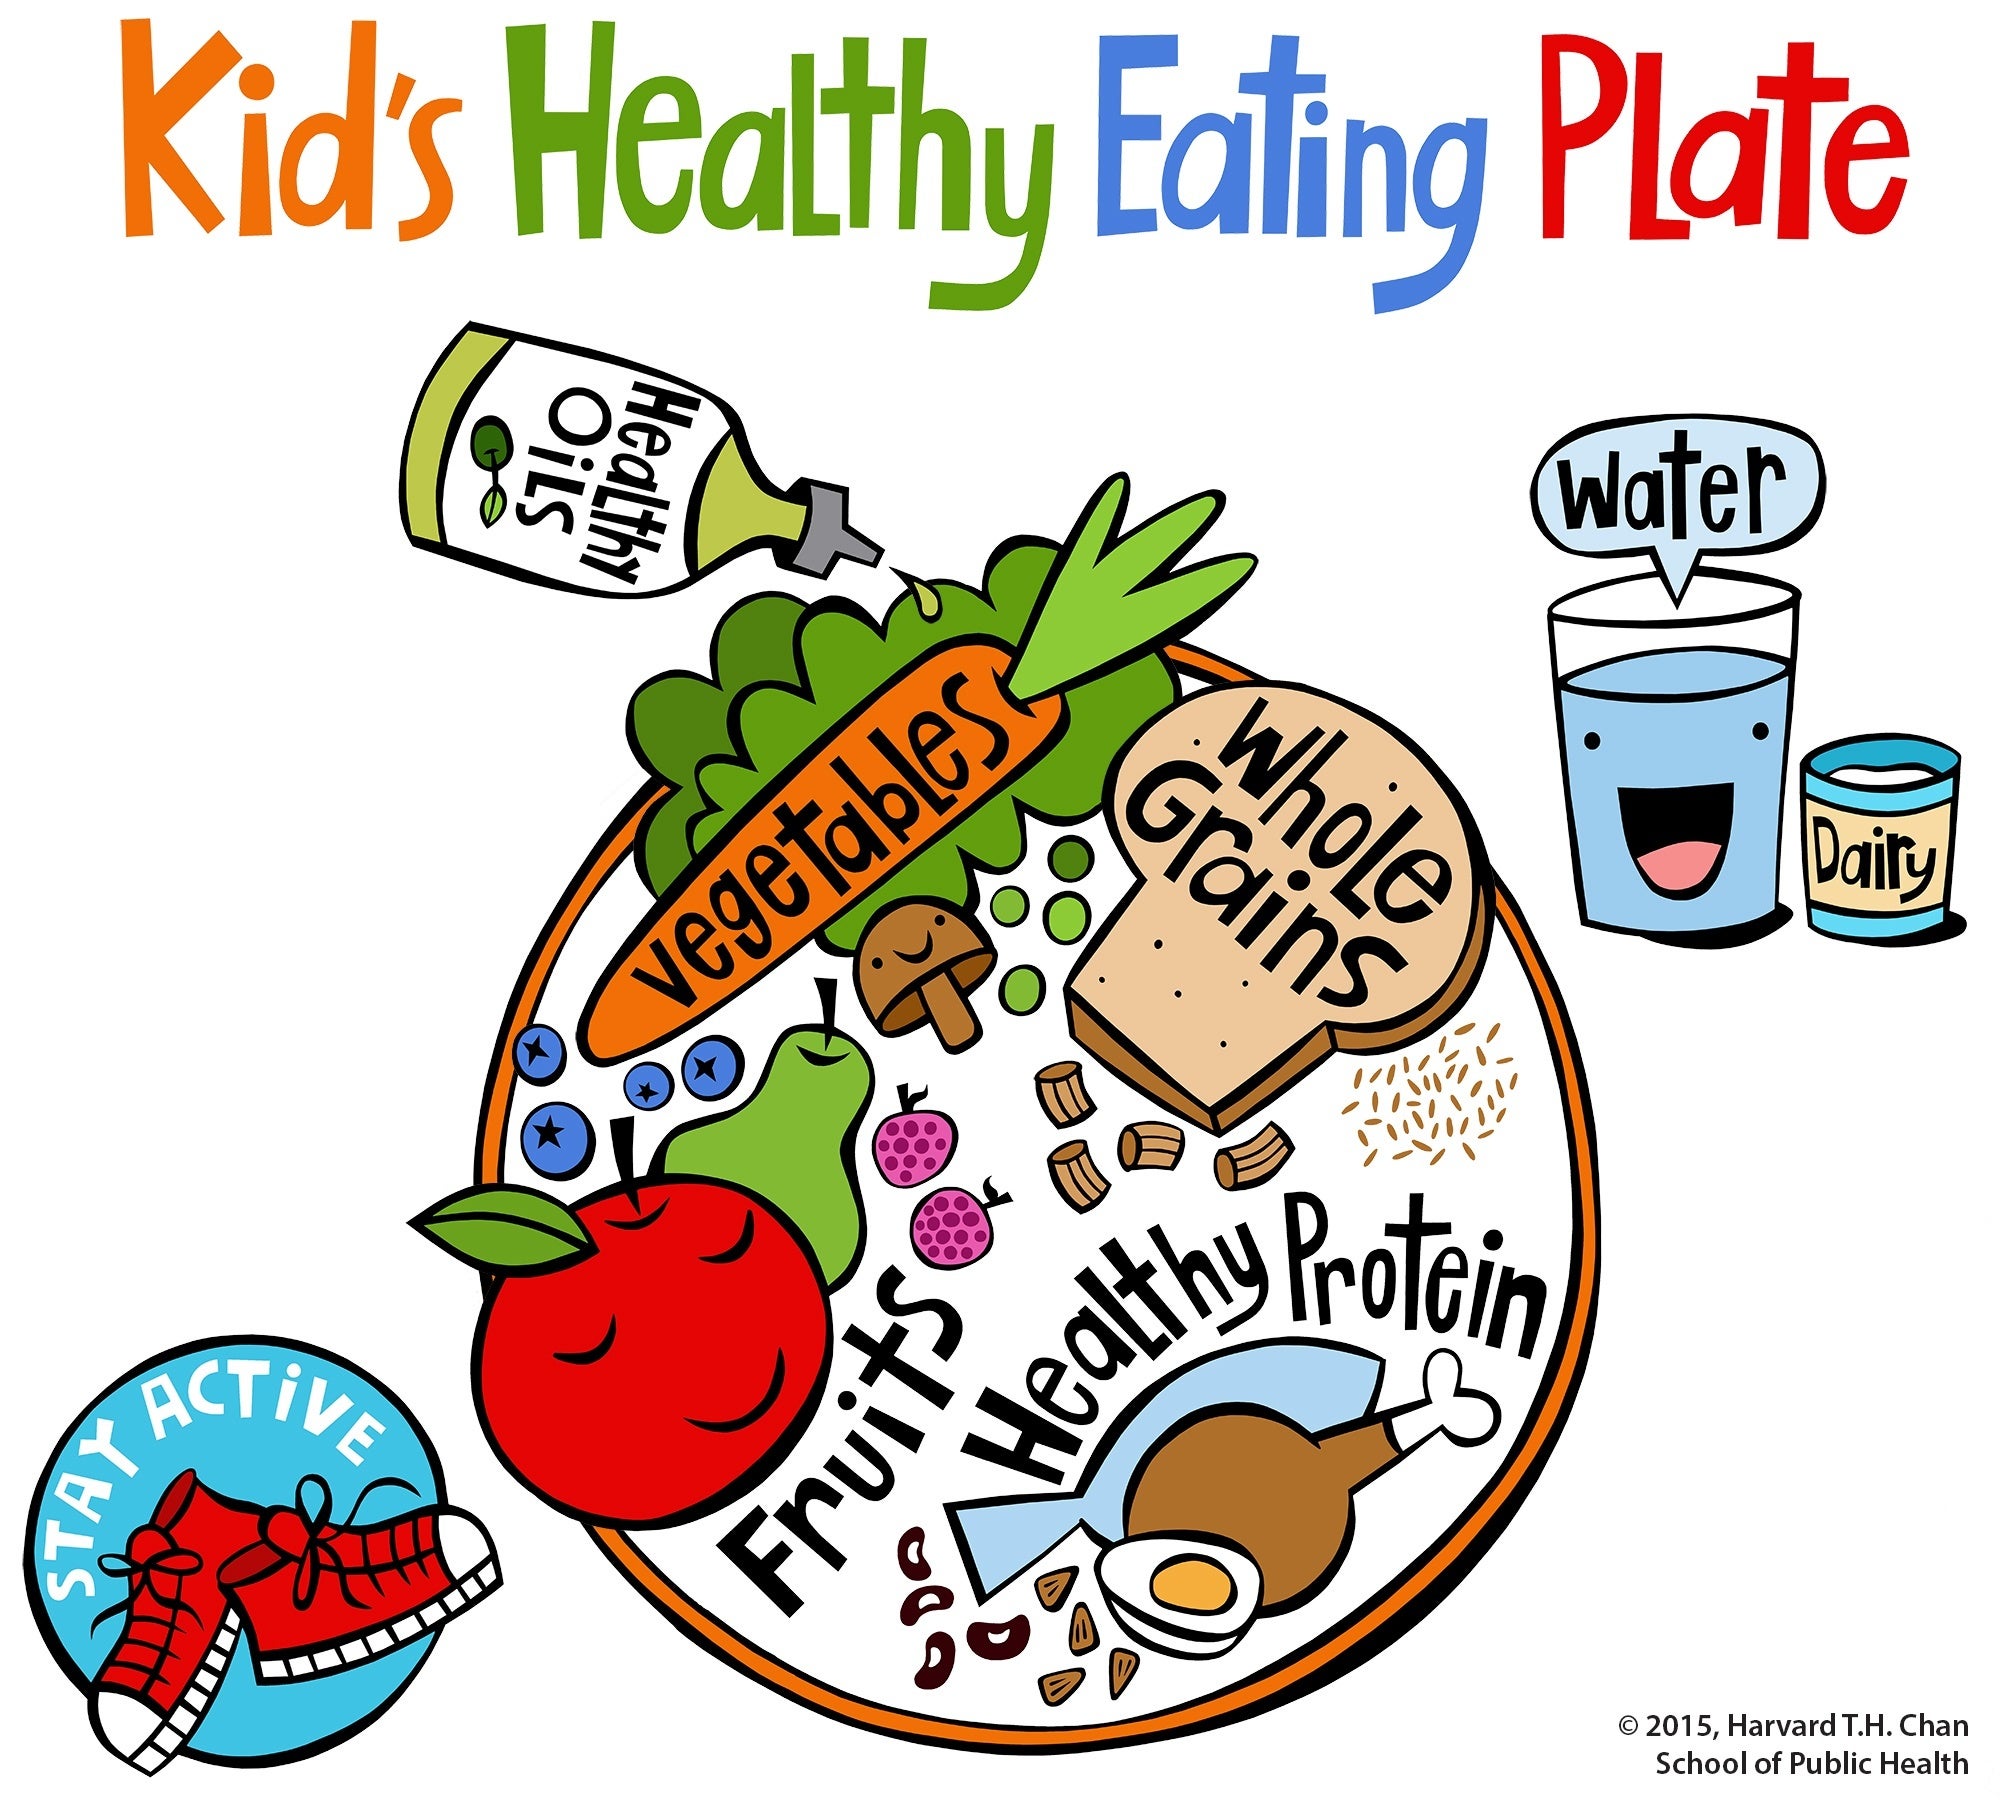 Kid's Healthy Eating Plate | The Nutrition Source | Harvard . Chan  School of Public Health